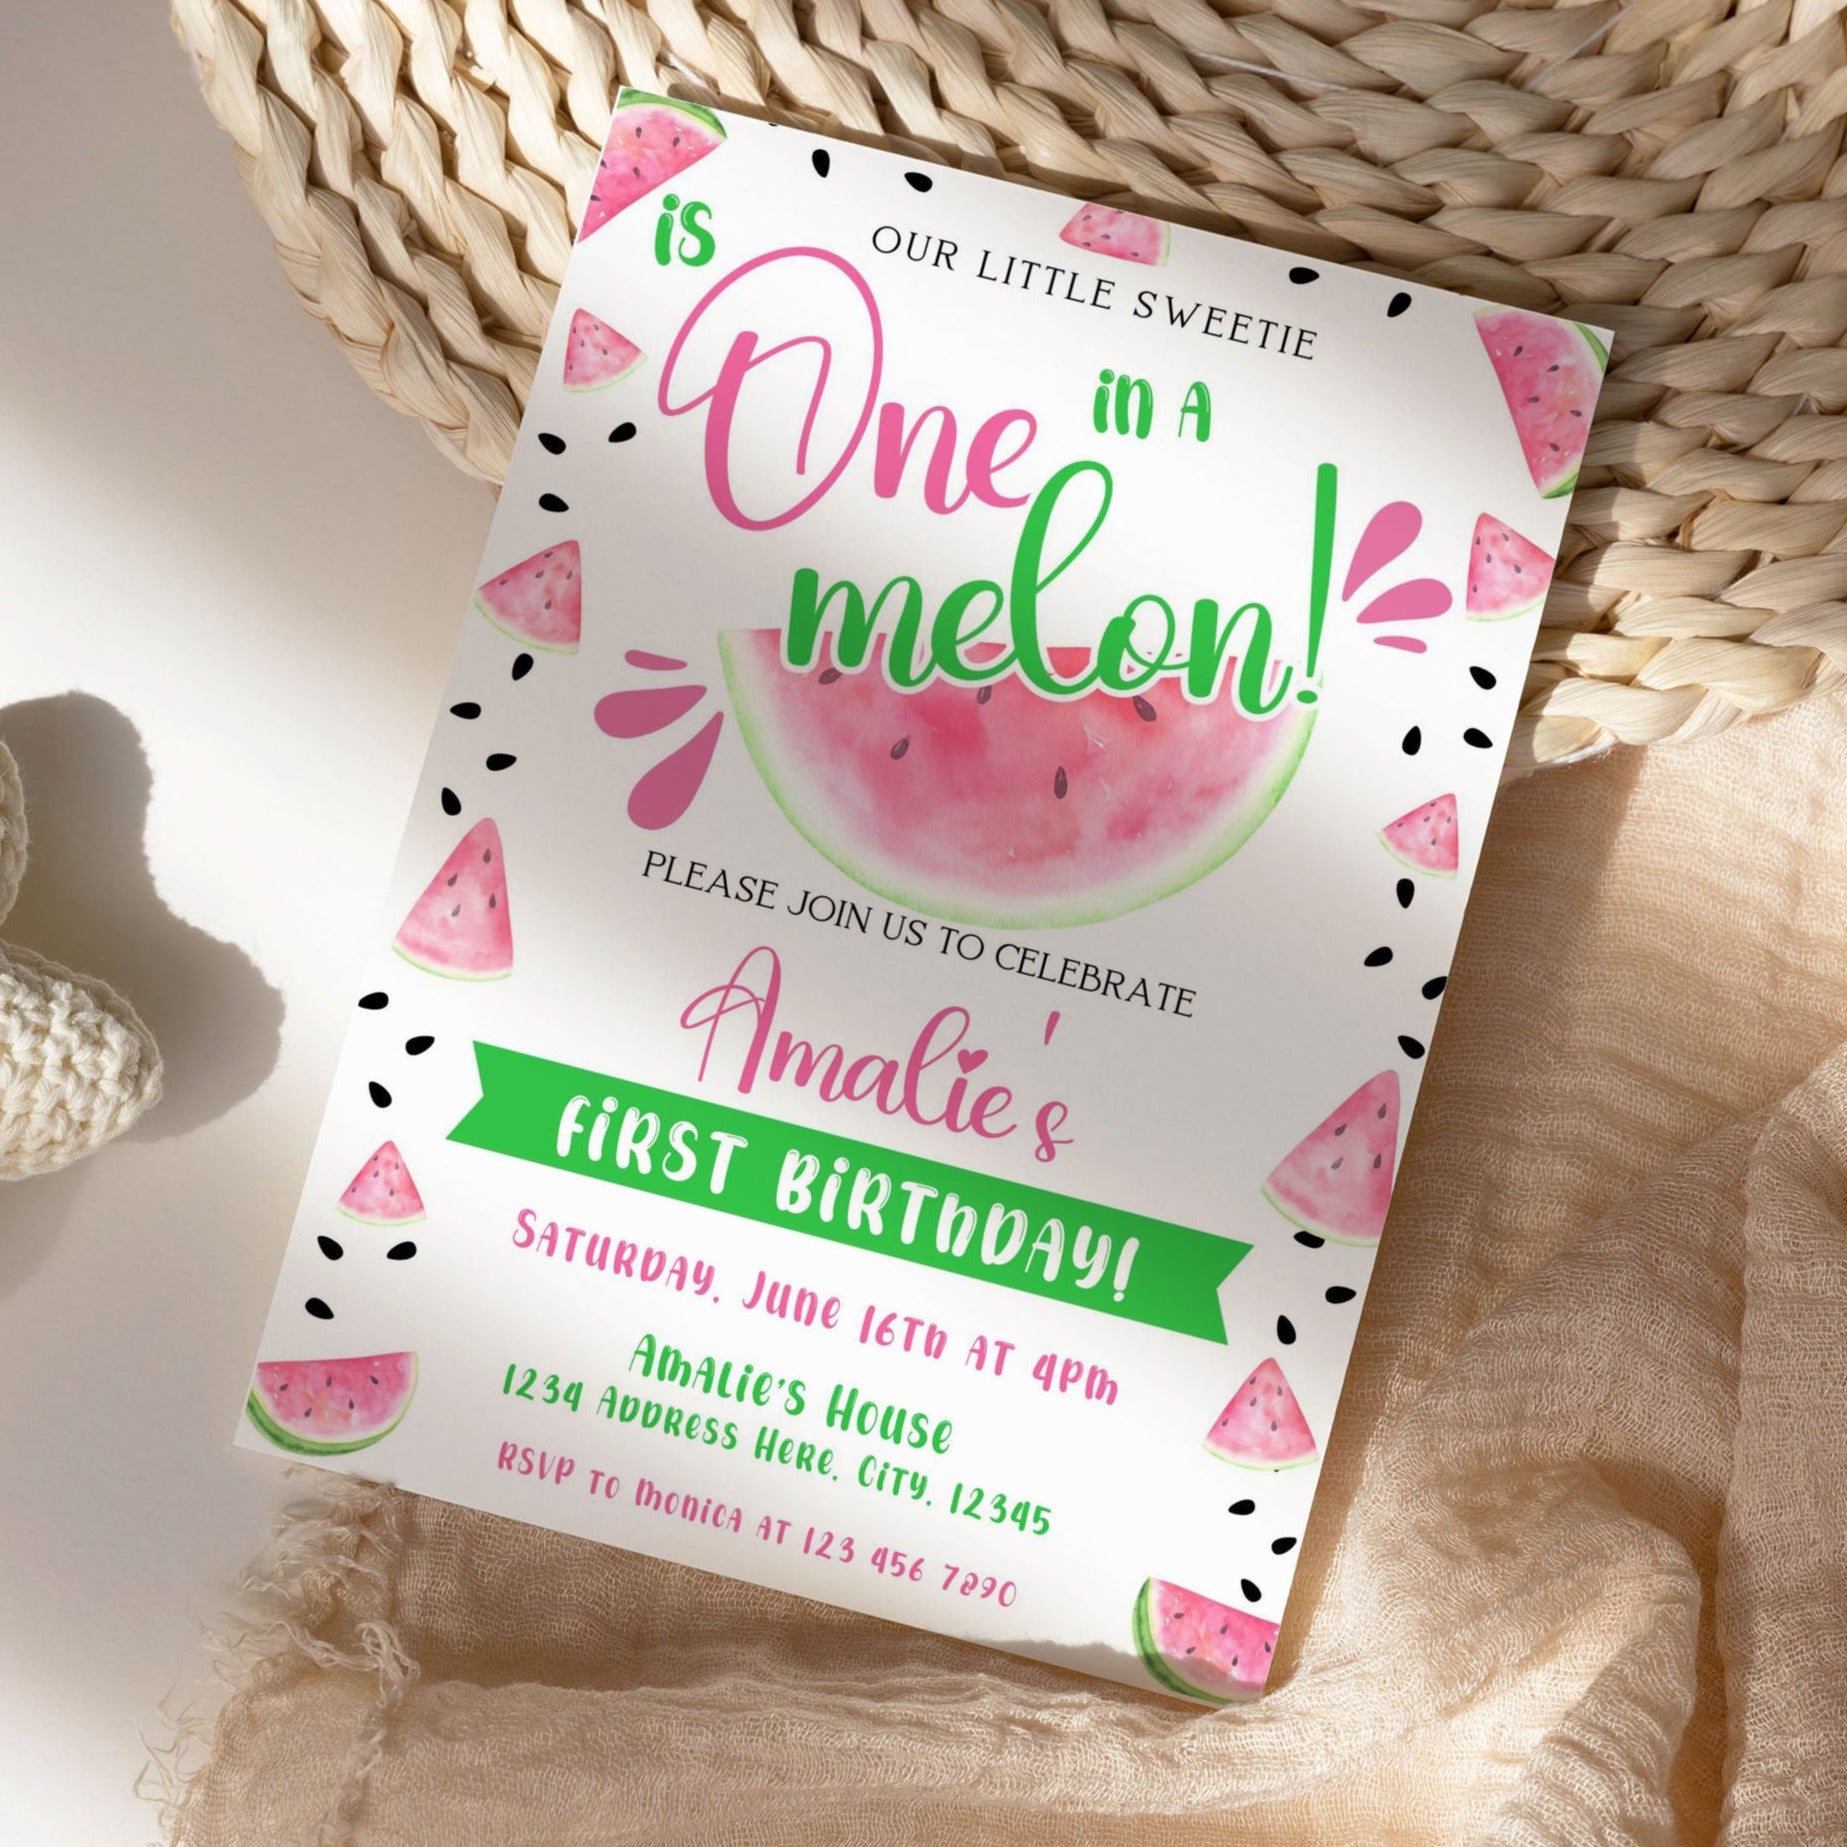 Adorable Watermelon Themed Invitation for a First Birthday Party